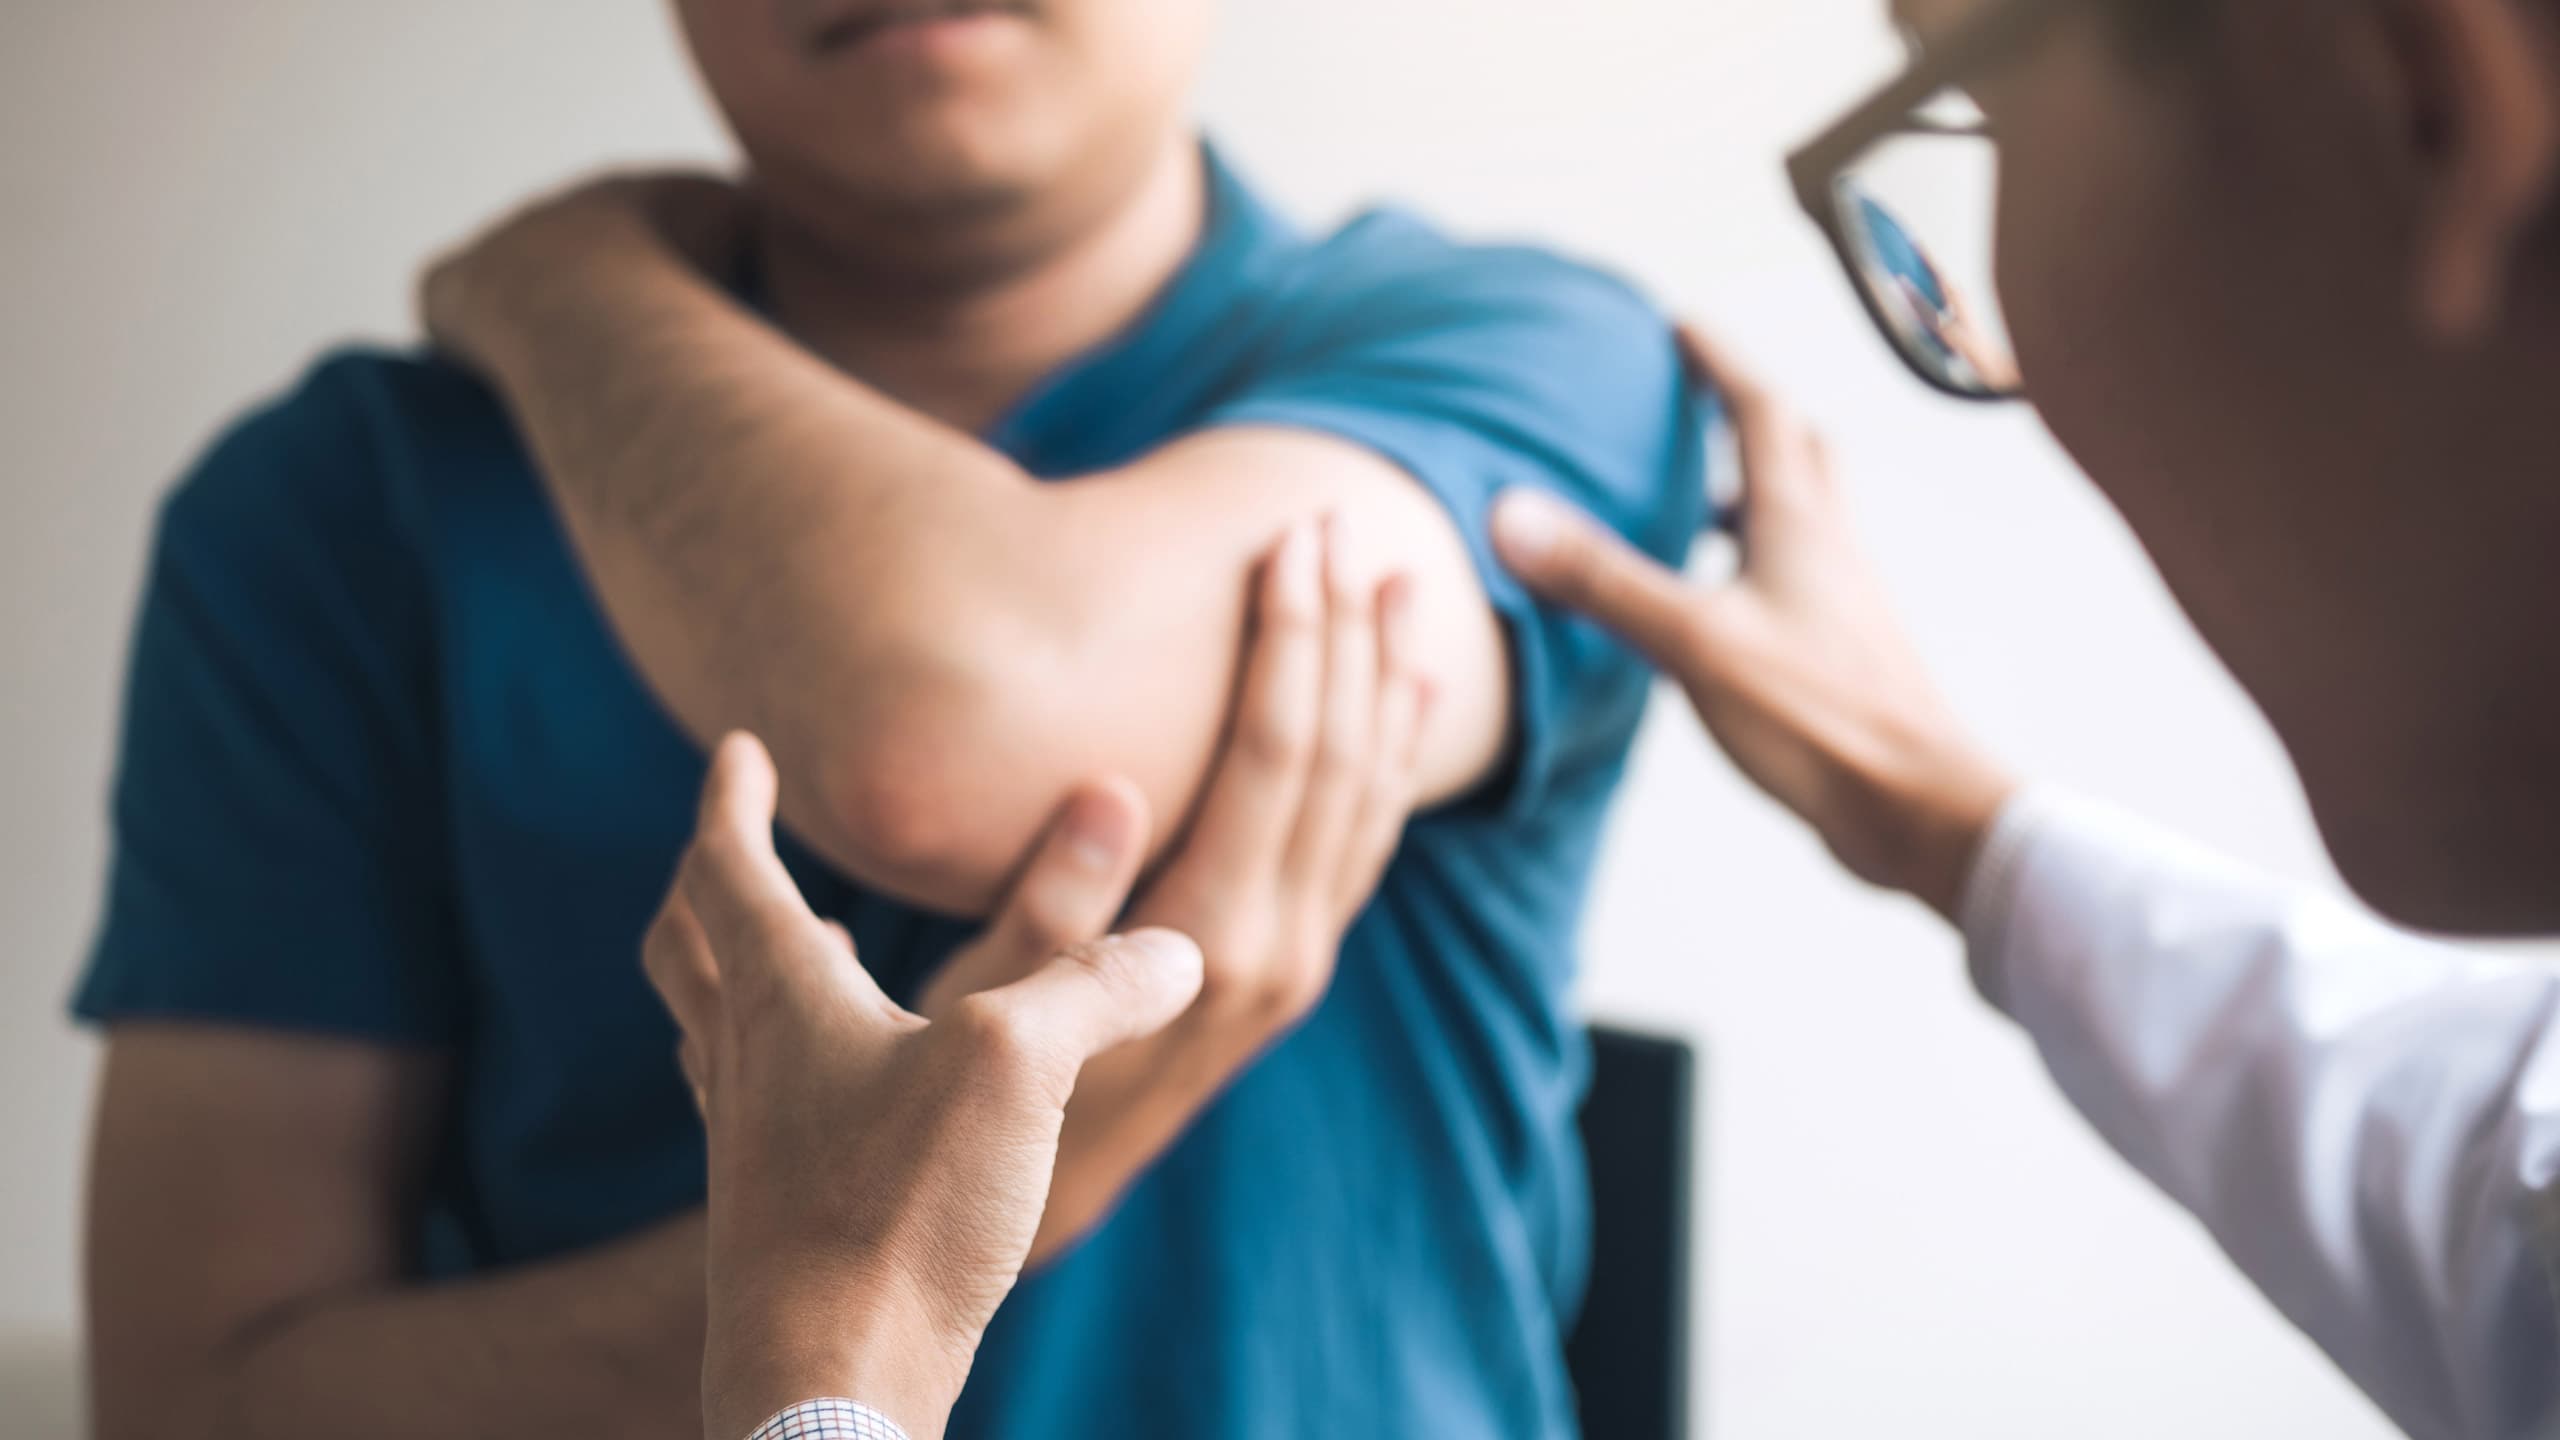 Elbow specialist examining a patient's elbow for elbow pain